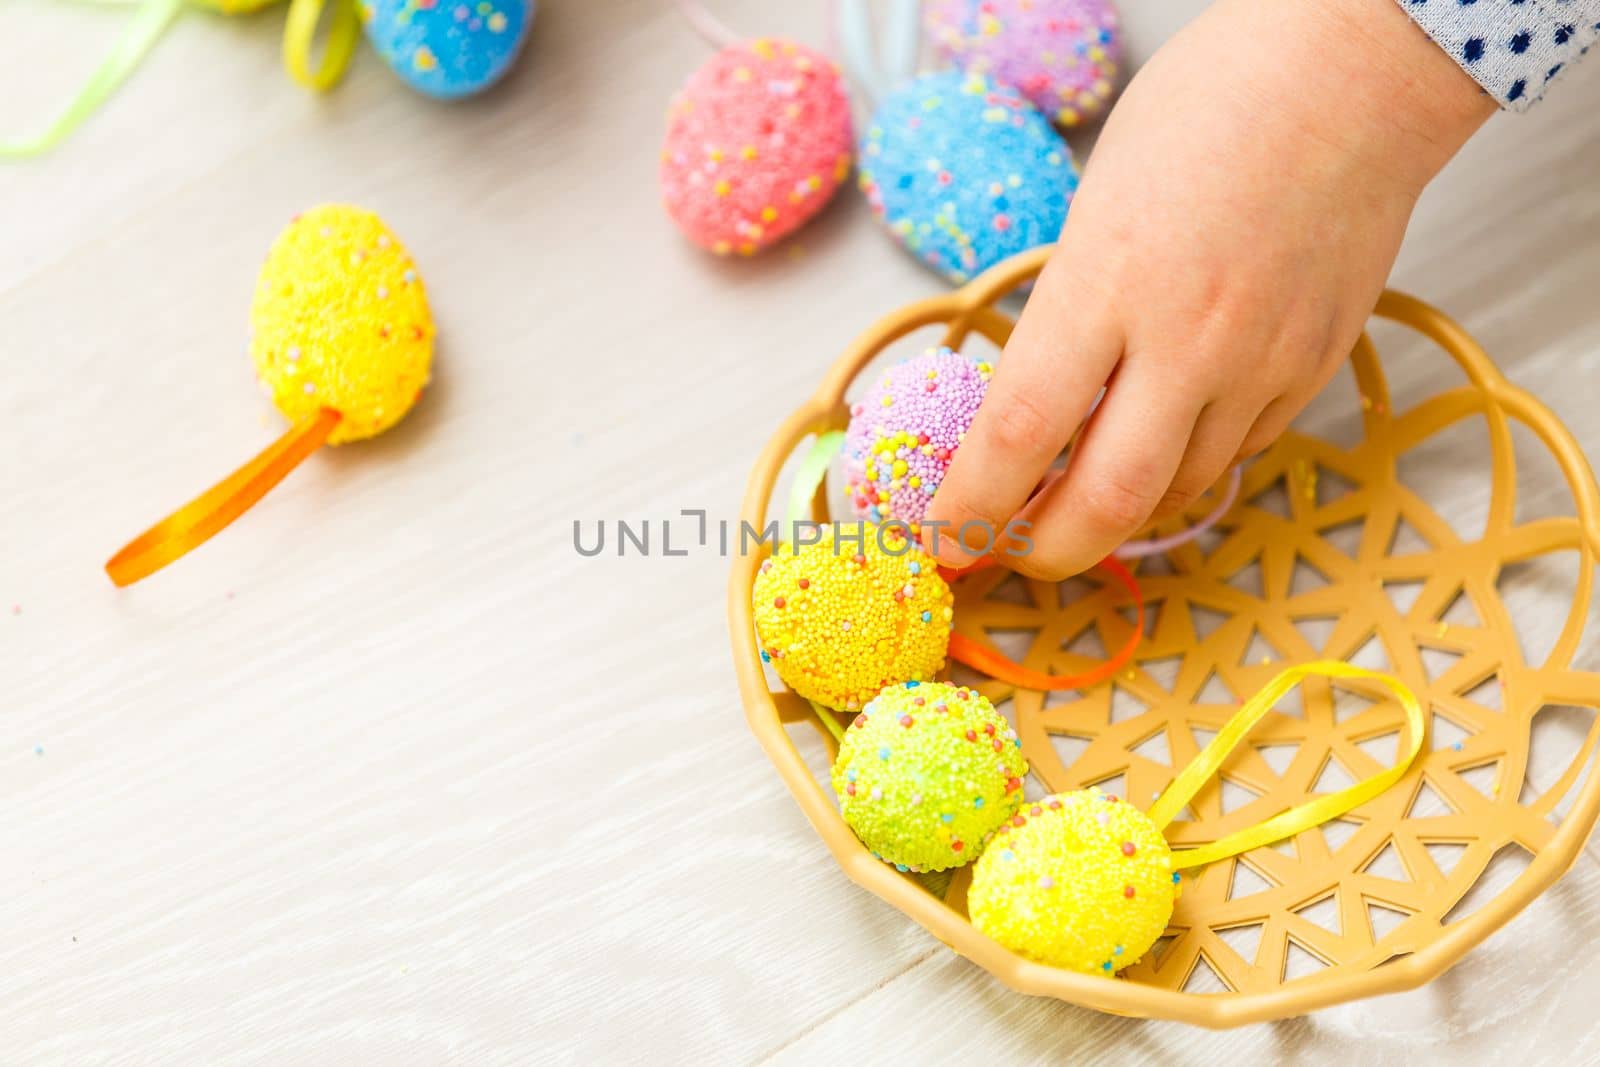 Cute smiling little girl with basket full of colorful easter eggs